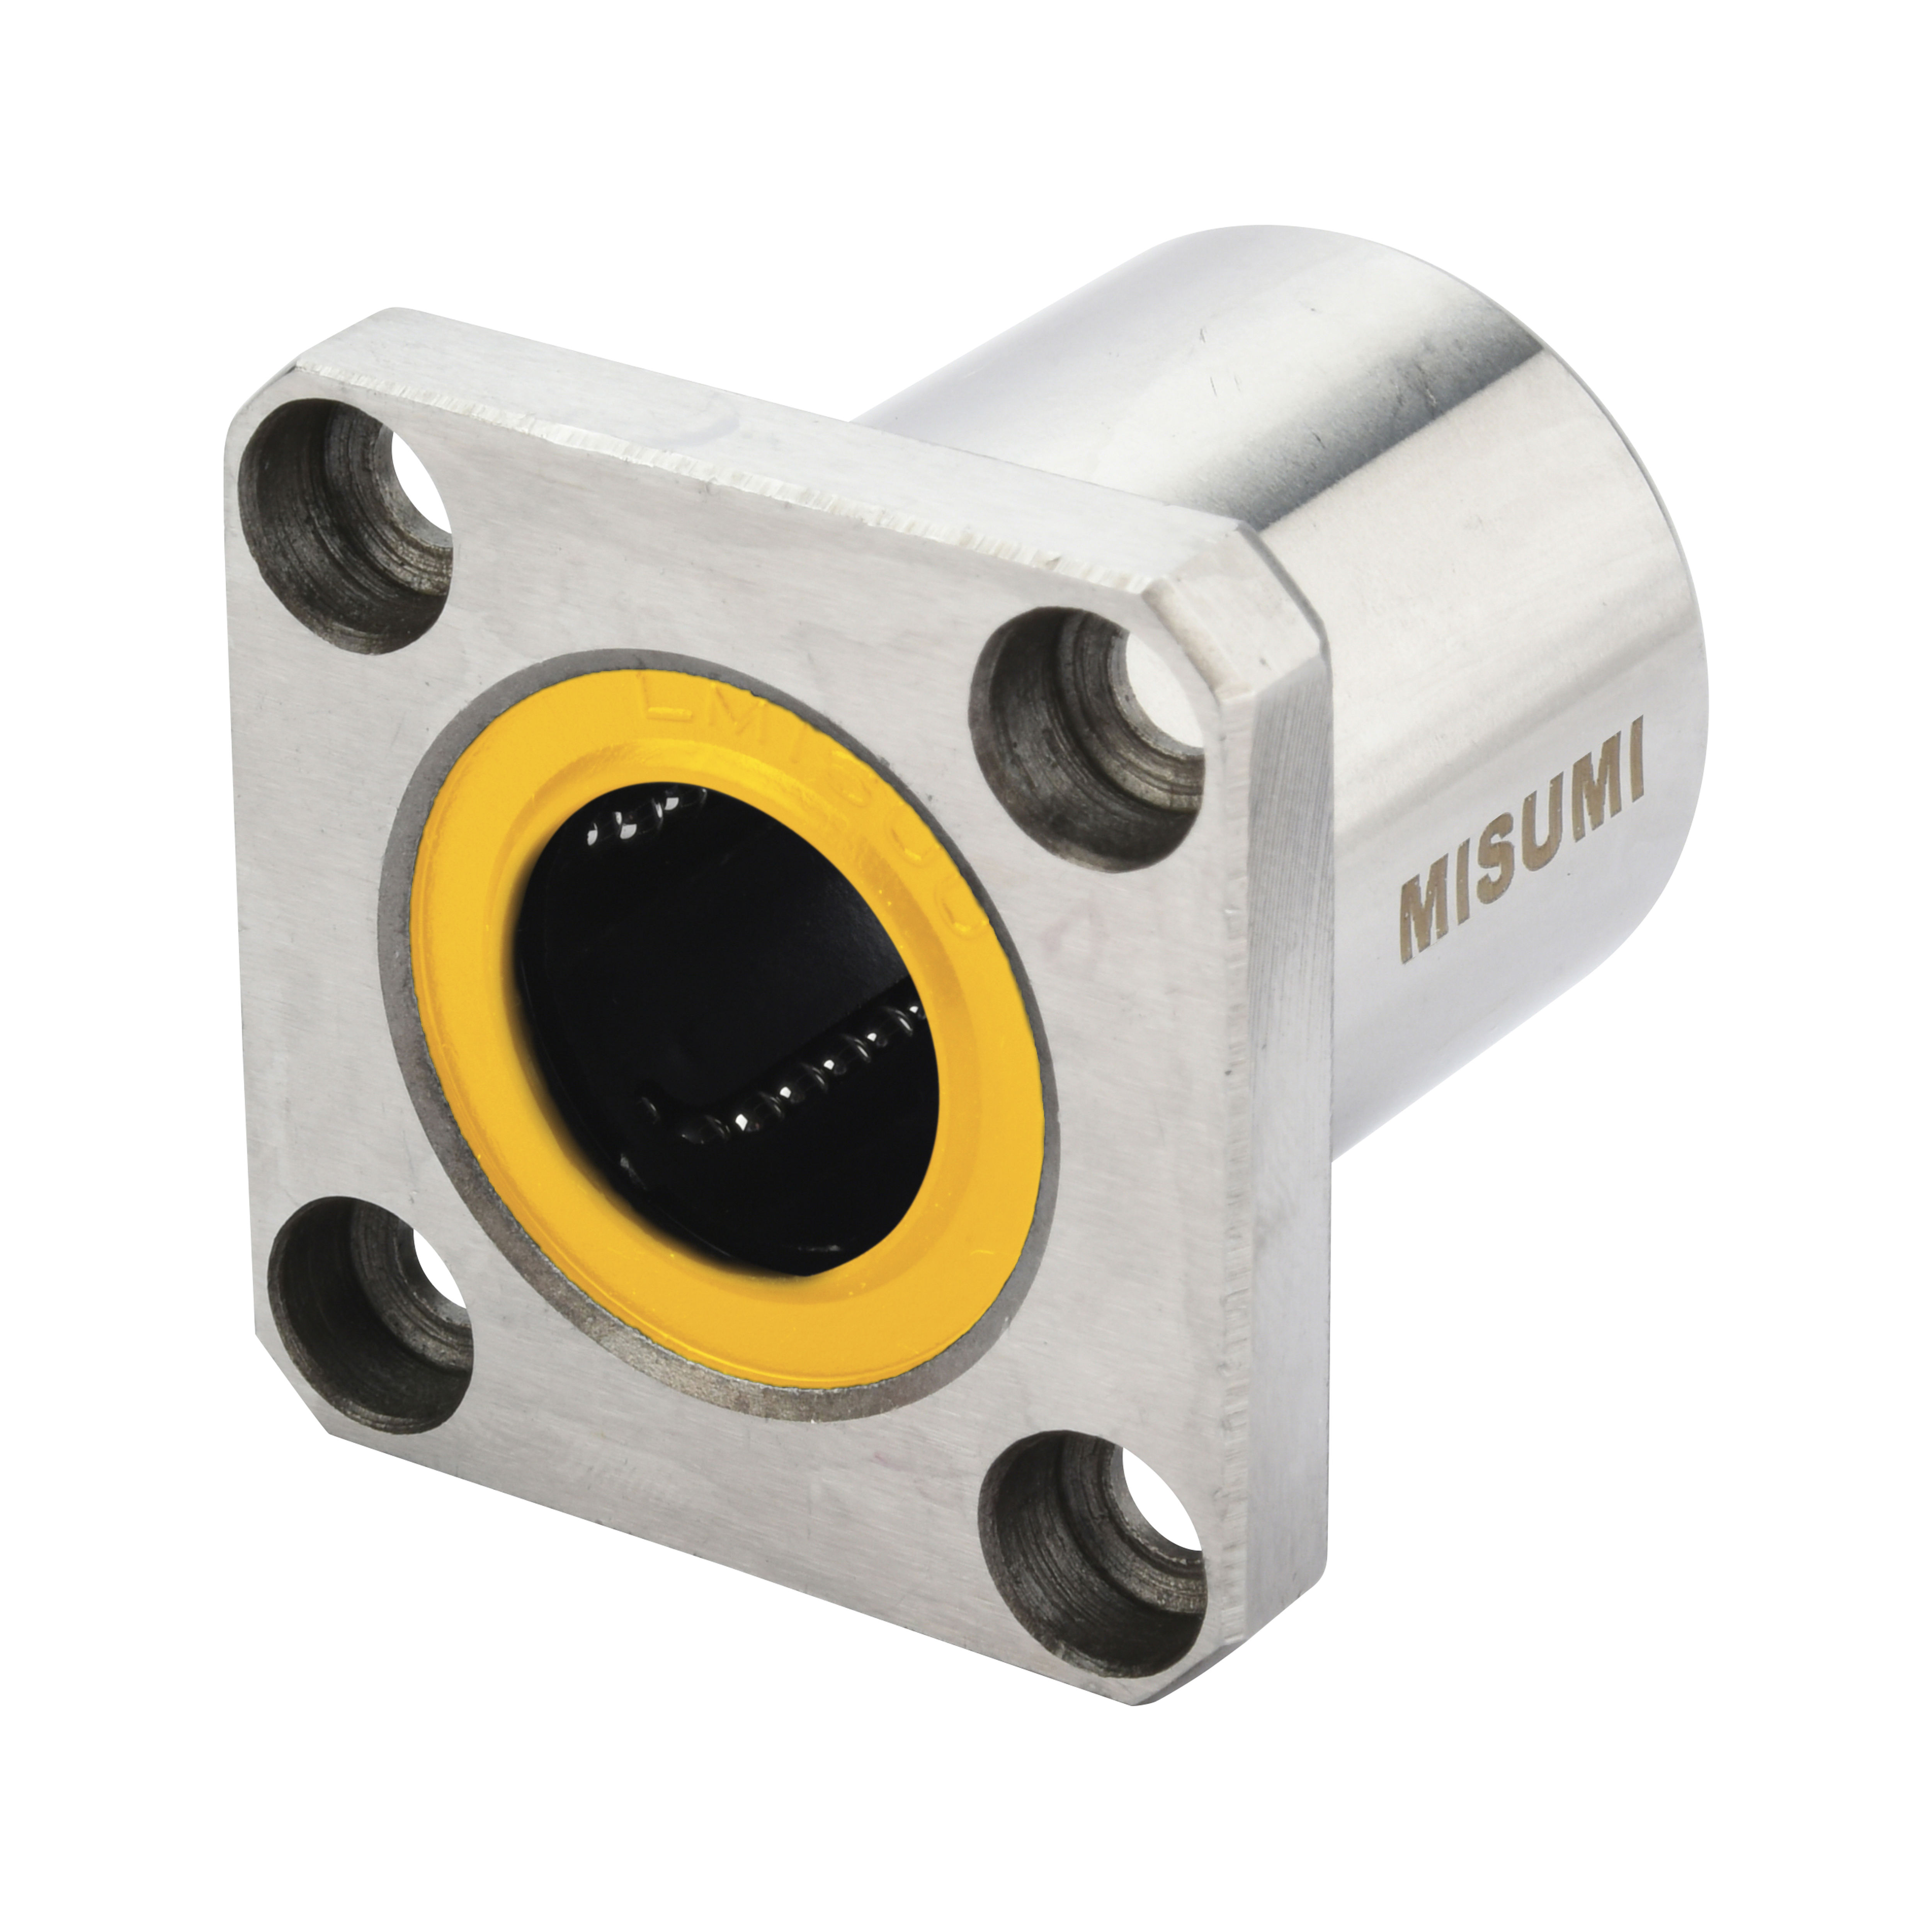 Square Flanged Linear Bushings, Single / Double / Opposite Counterbored Hole (C-LMK6UU) 